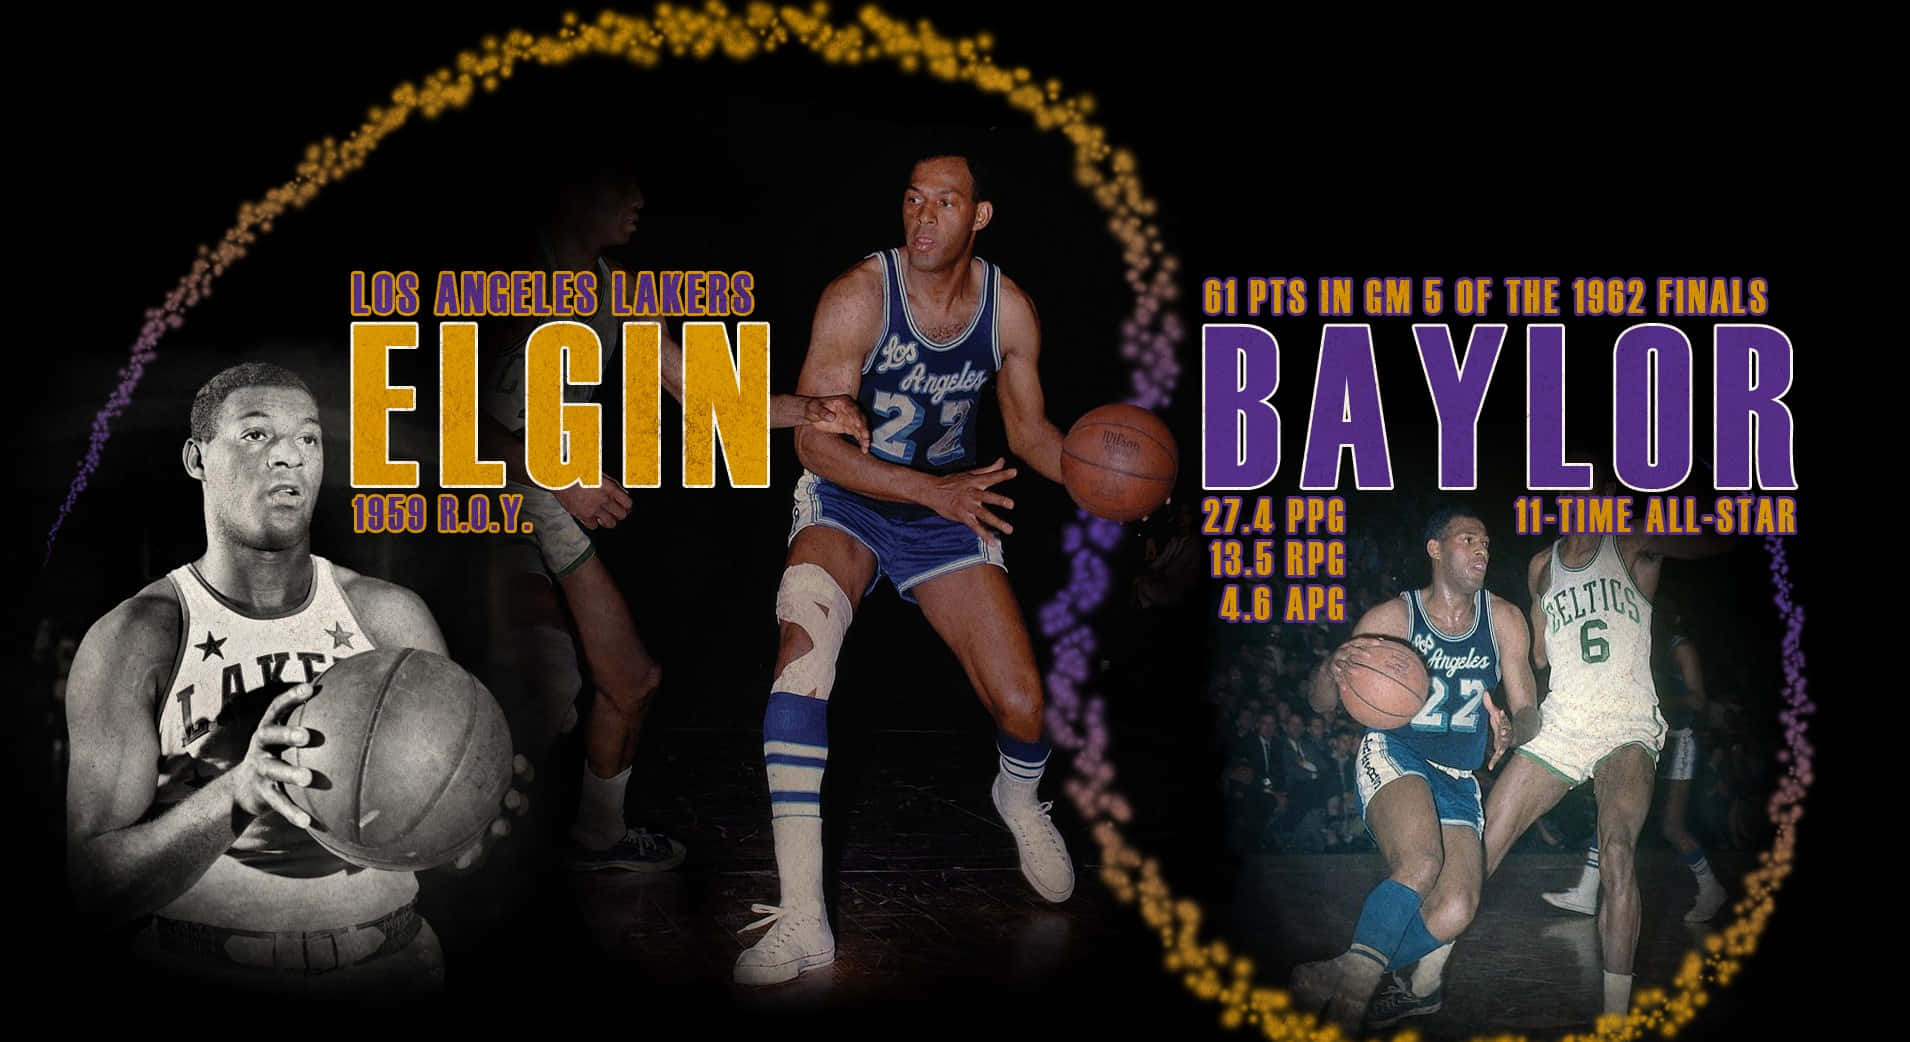 Elginbaylor Jerry West Spelar (for A Wallpaper Featuring An Image Of Elgin Baylor And Jerry West Playing Basketball) Wallpaper